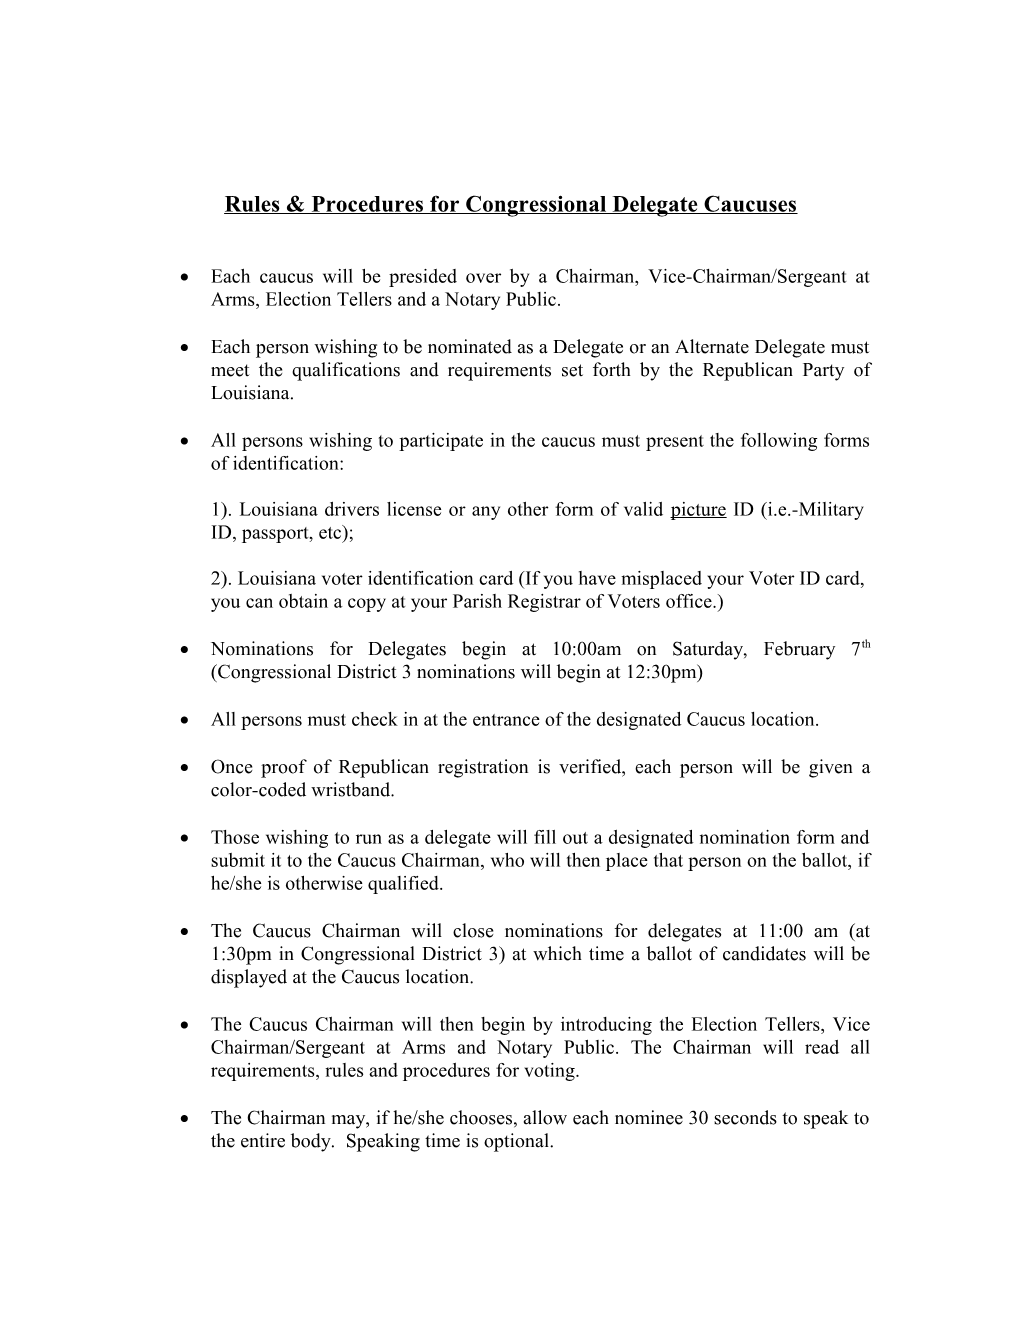 Rules for Congressional Delegate Caucuses